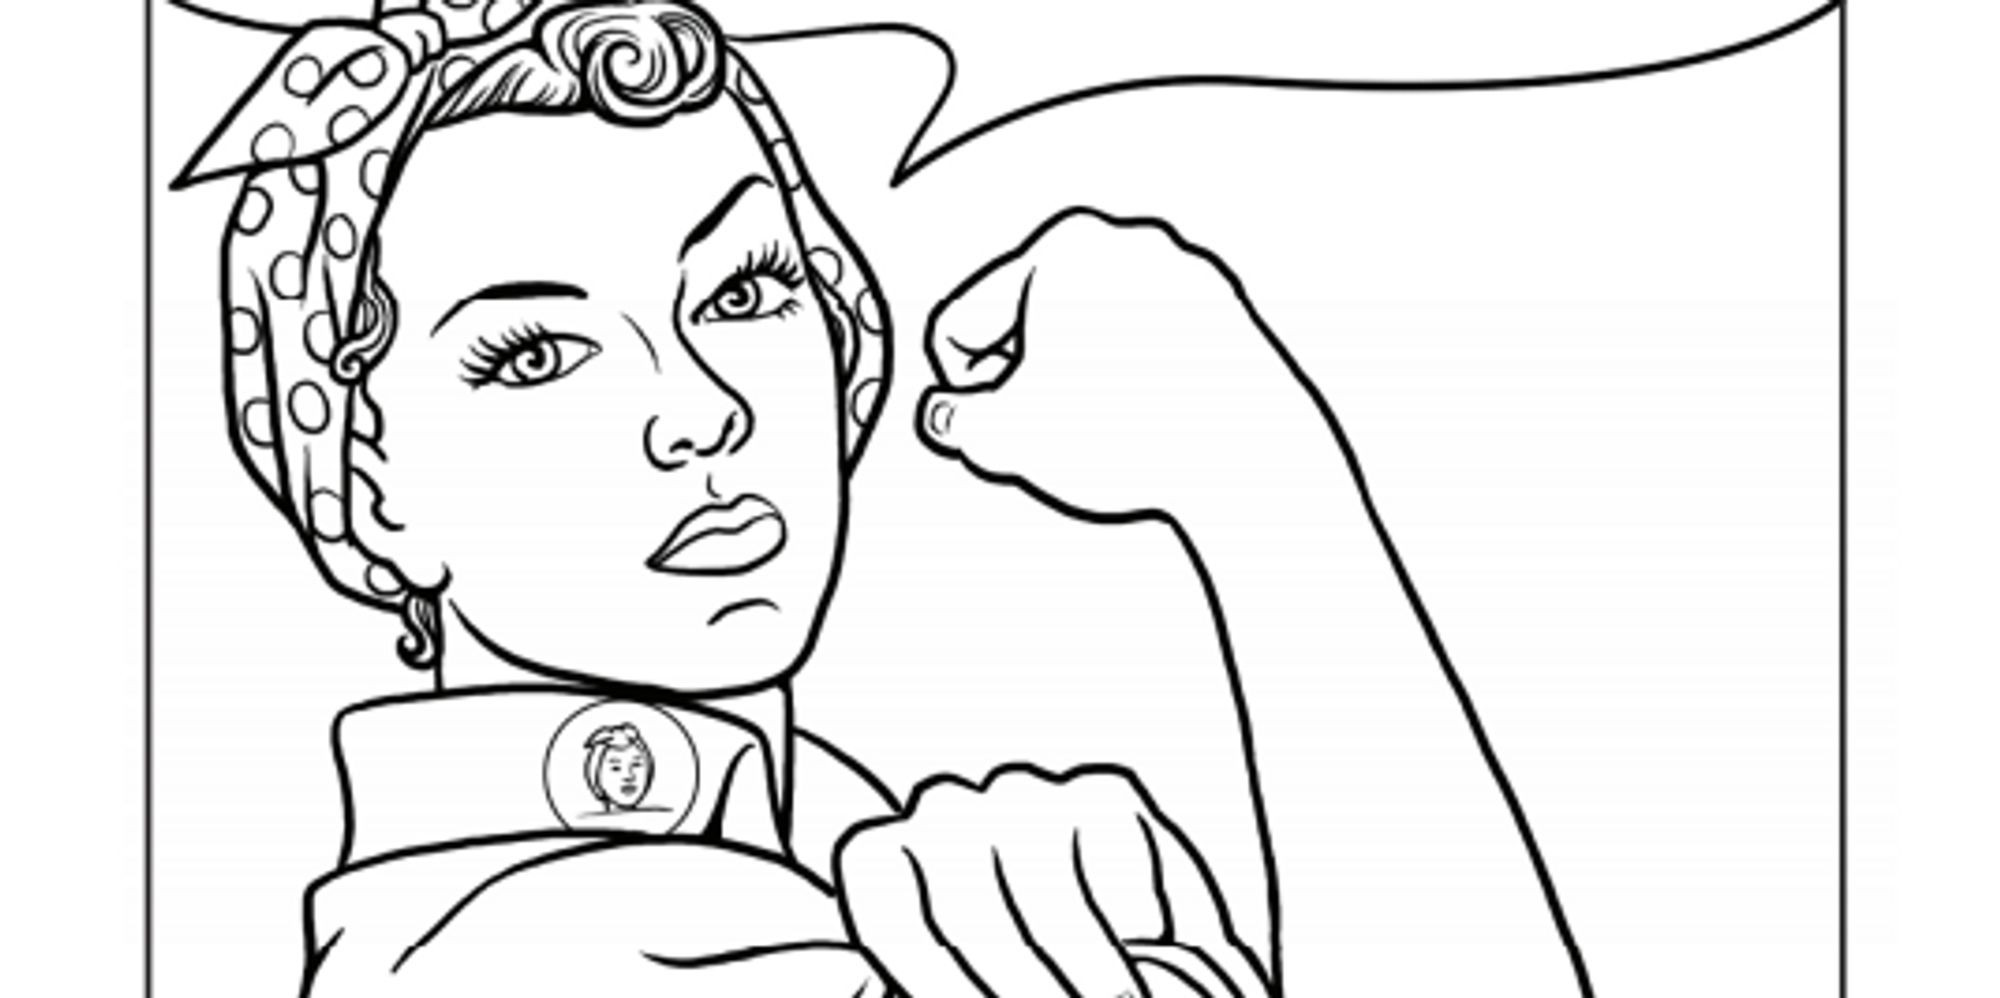 Girl Power Coloring Pages
 21 Printable Coloring Sheets That Celebrate Girl Power